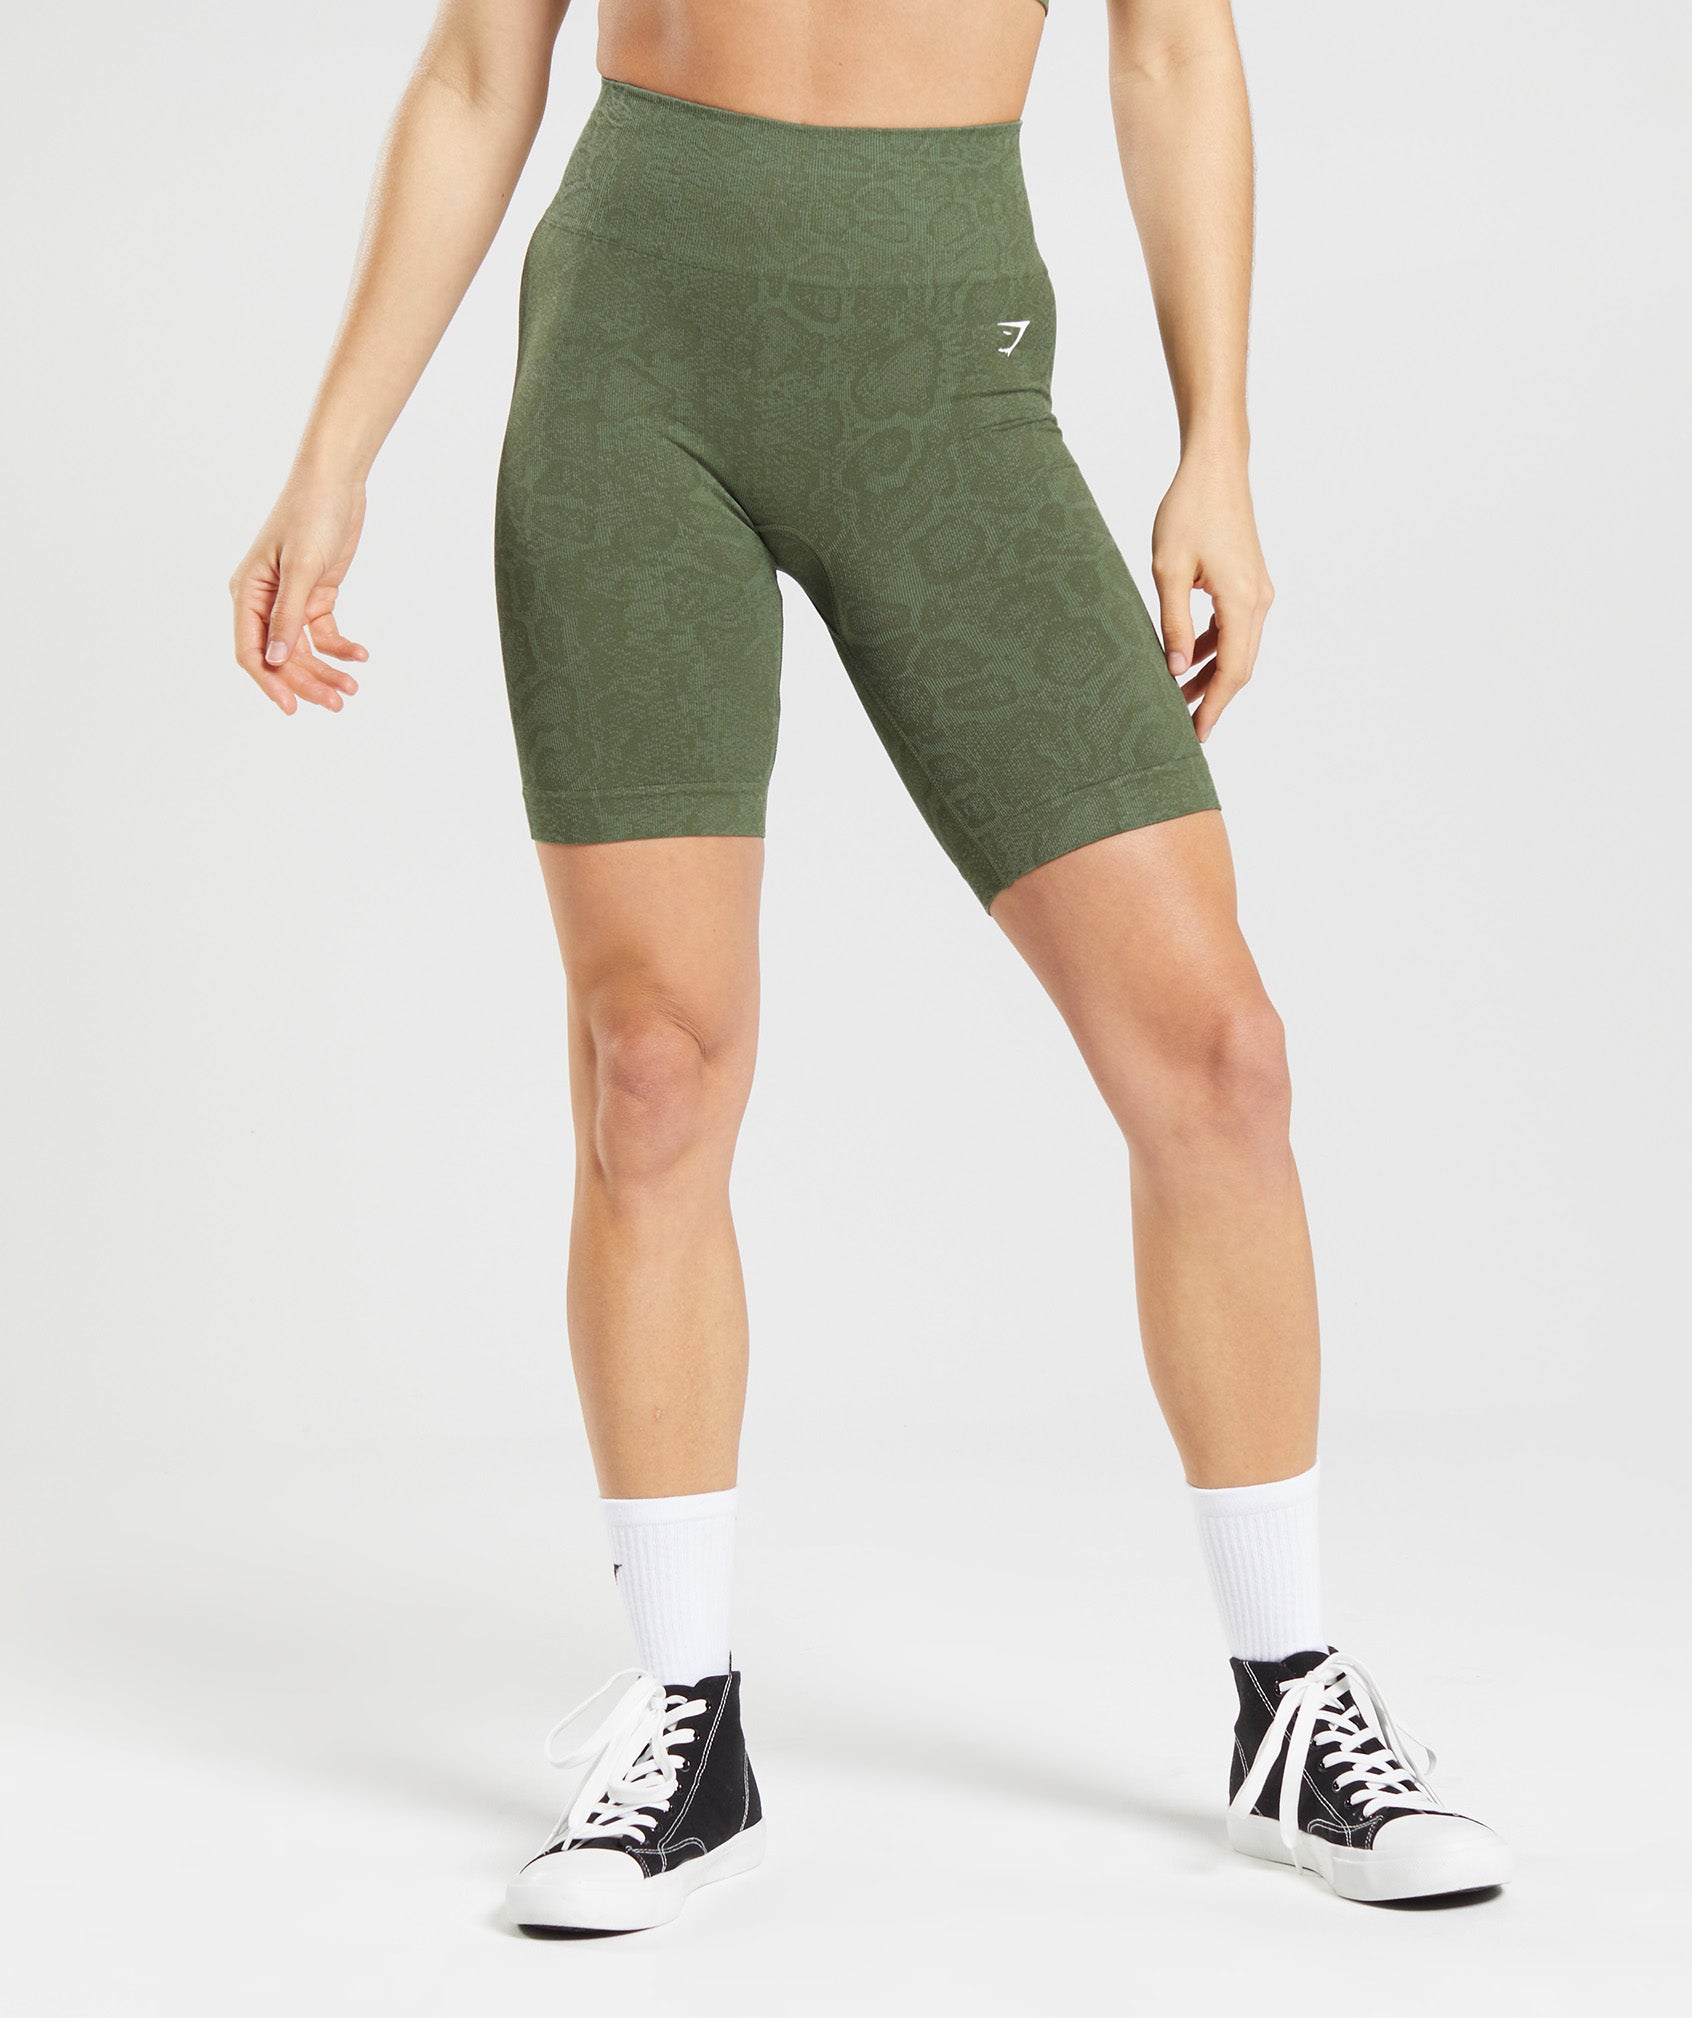 http://cdn.shopify.com/s/files/1/0156/6146/products/AdaptAnimalCyclingShortsENG-L-A0115WillowGreen-CoreOliveB4A7J-EB2R293_ad6fff1a-d07f-4384-b6a4-3c52870c9a7d.jpg?v=1679665043